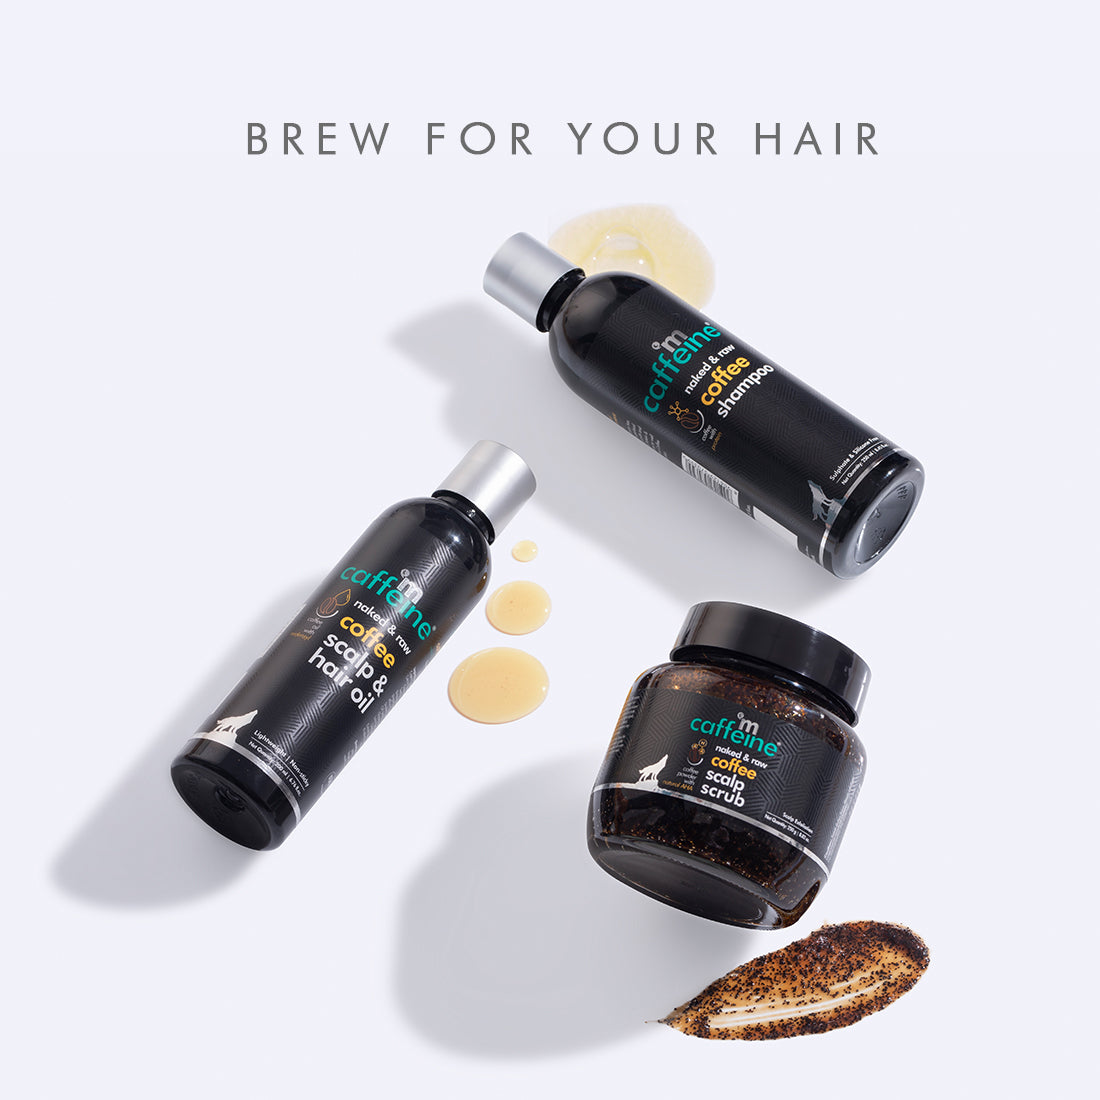 mCaffeine Limited Edition Coffee Brew - Hair Care Gift Kit